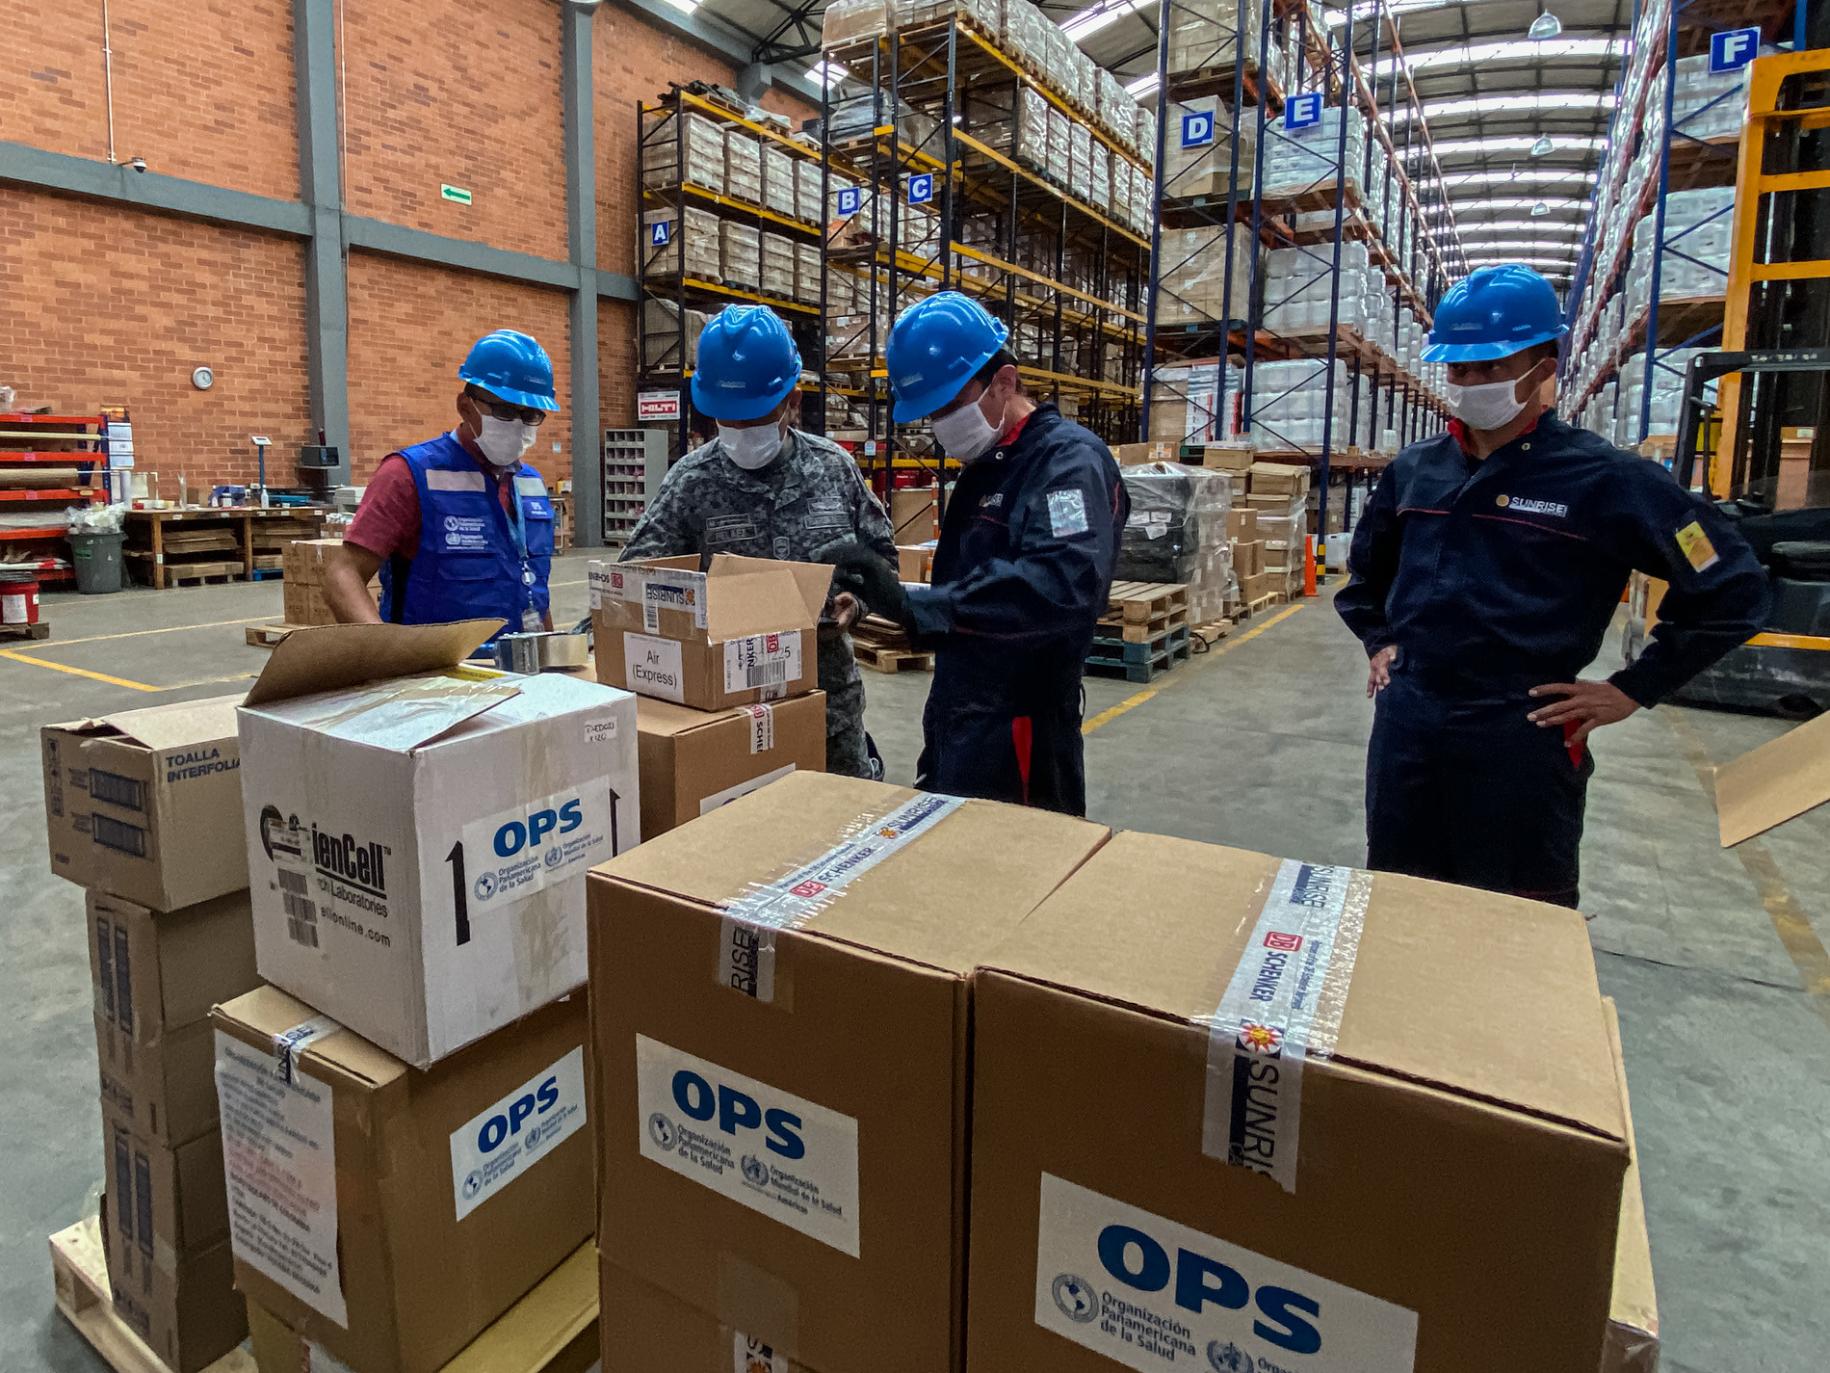 UN staffers at a warehouse stocked full of life-saving supplies.